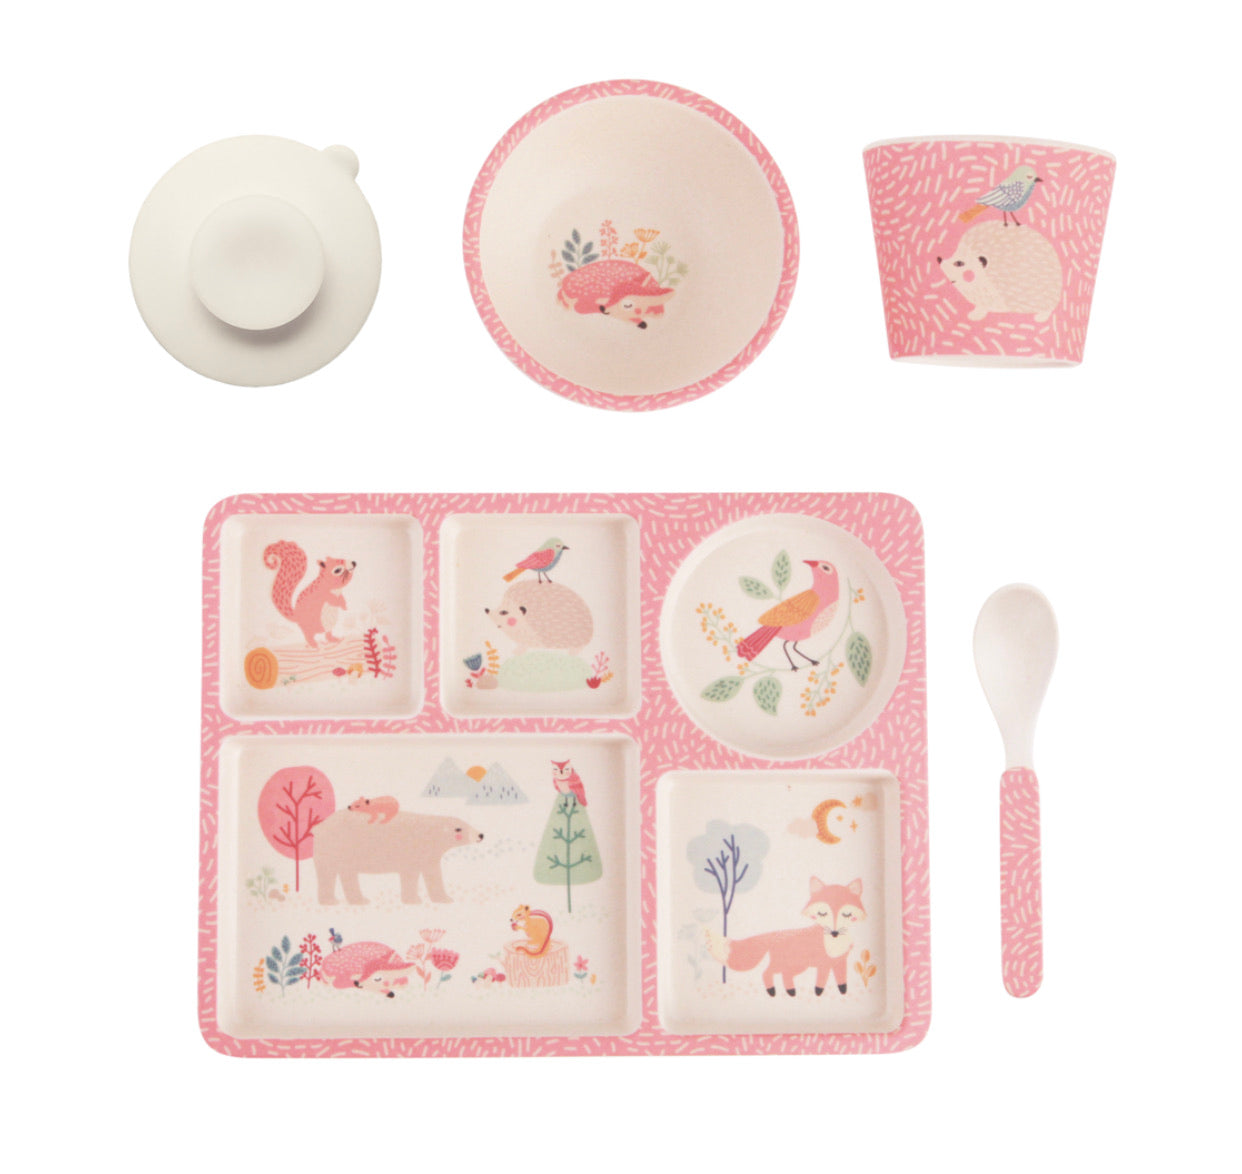 Love Mae - Divided Plate Set - Woodland Friends